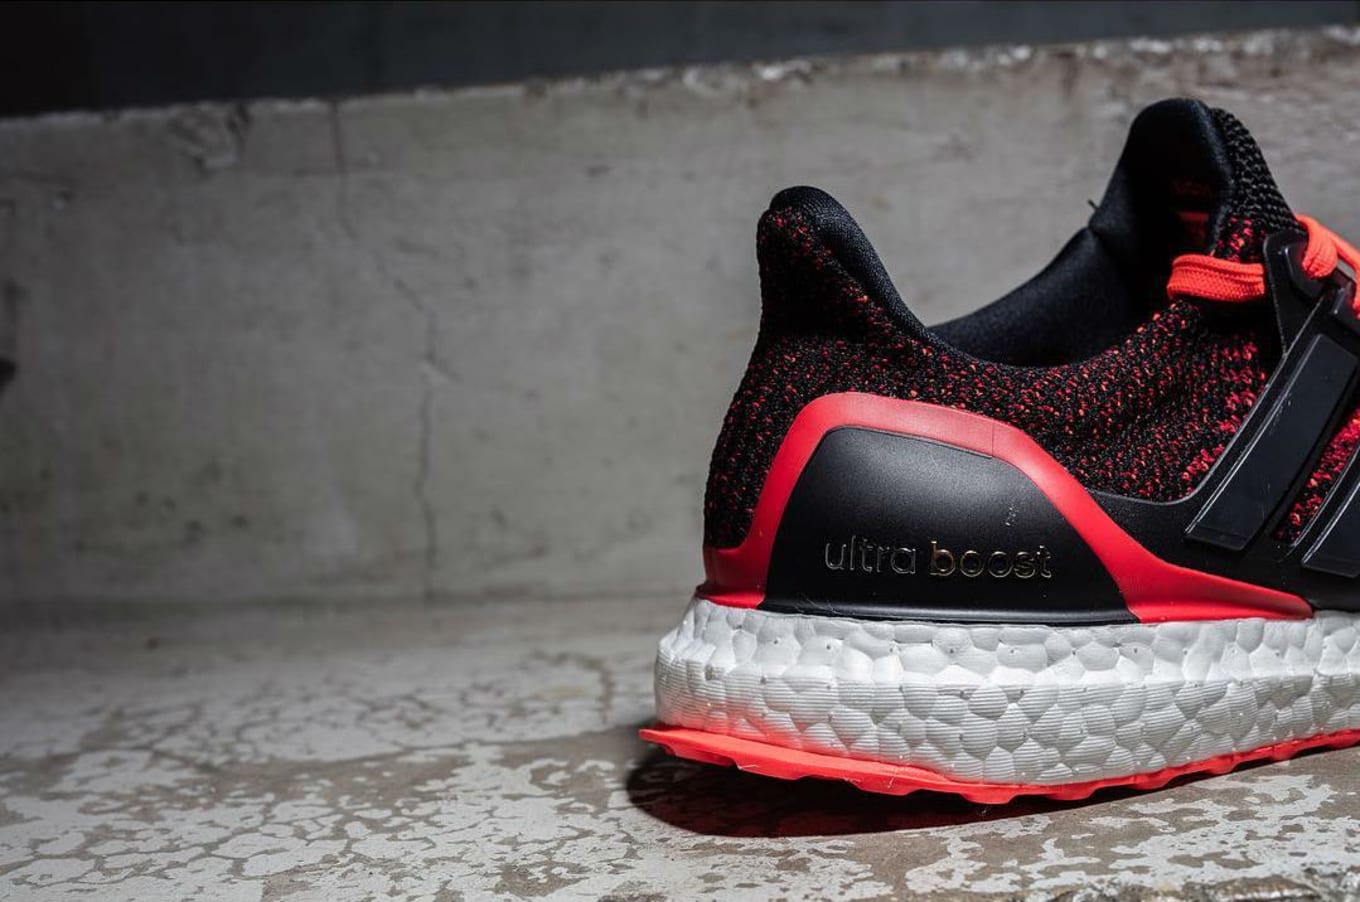 black and red adidas ultra boost